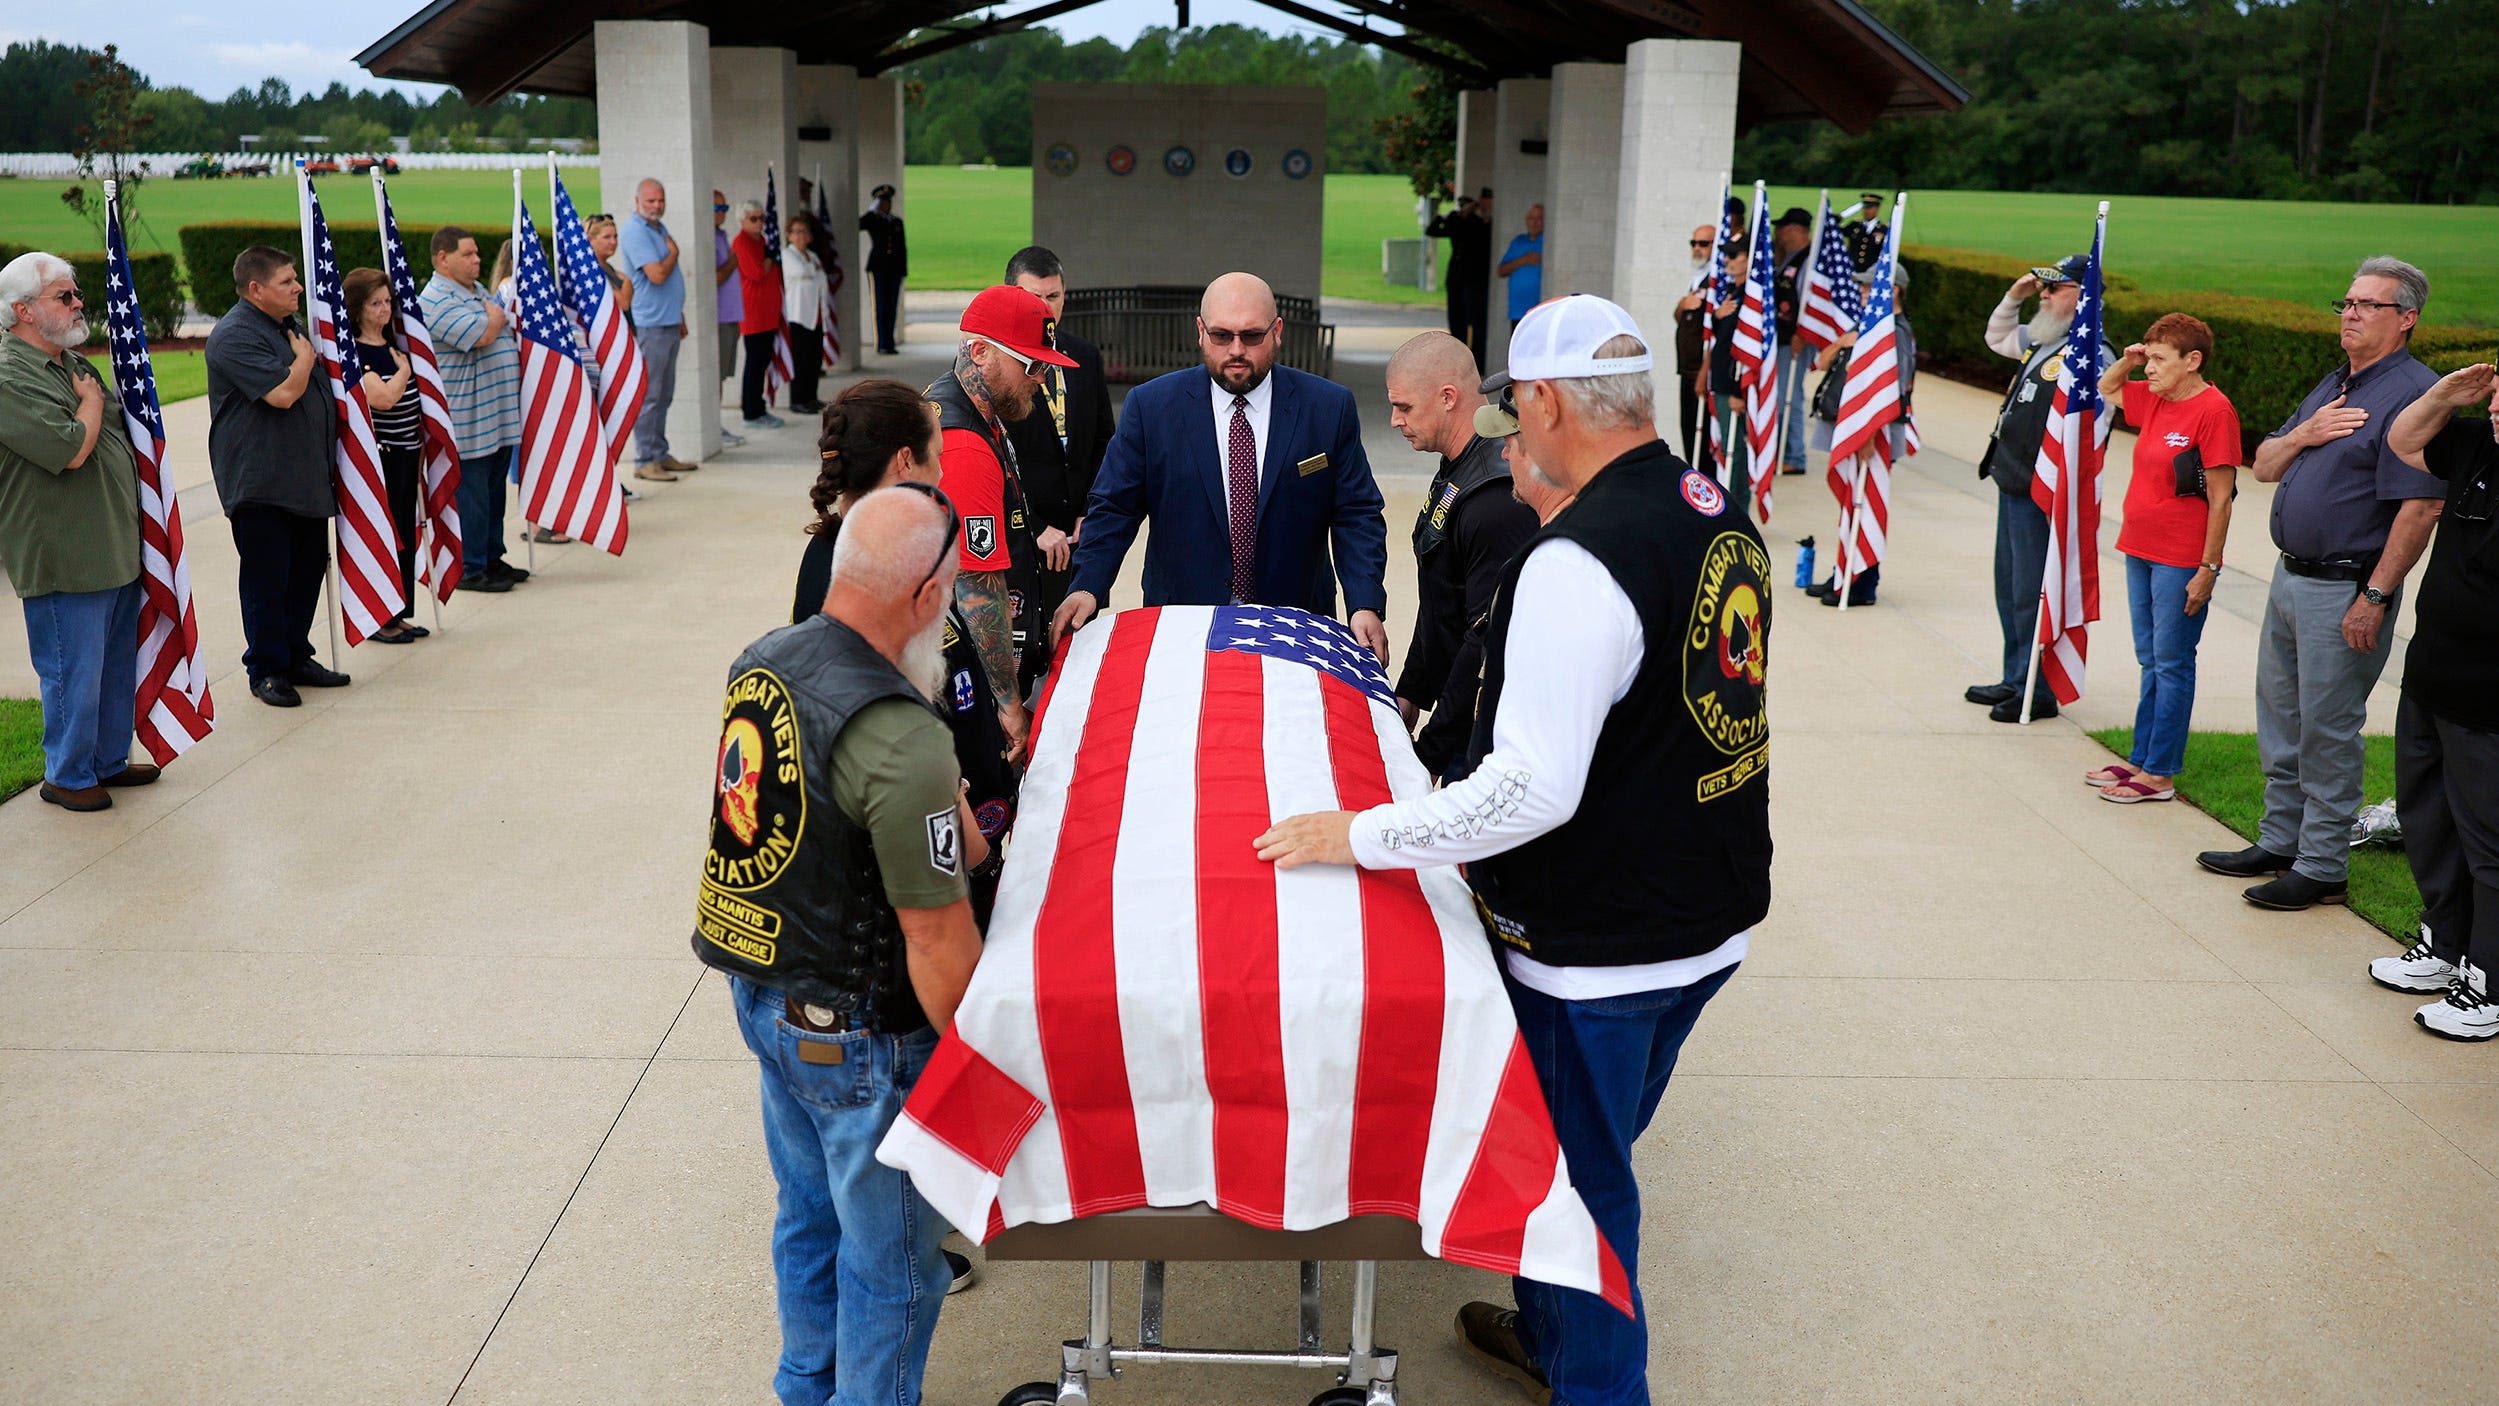 With no family, veteran laid to rest at Jacksonville National Cemetery honored by others